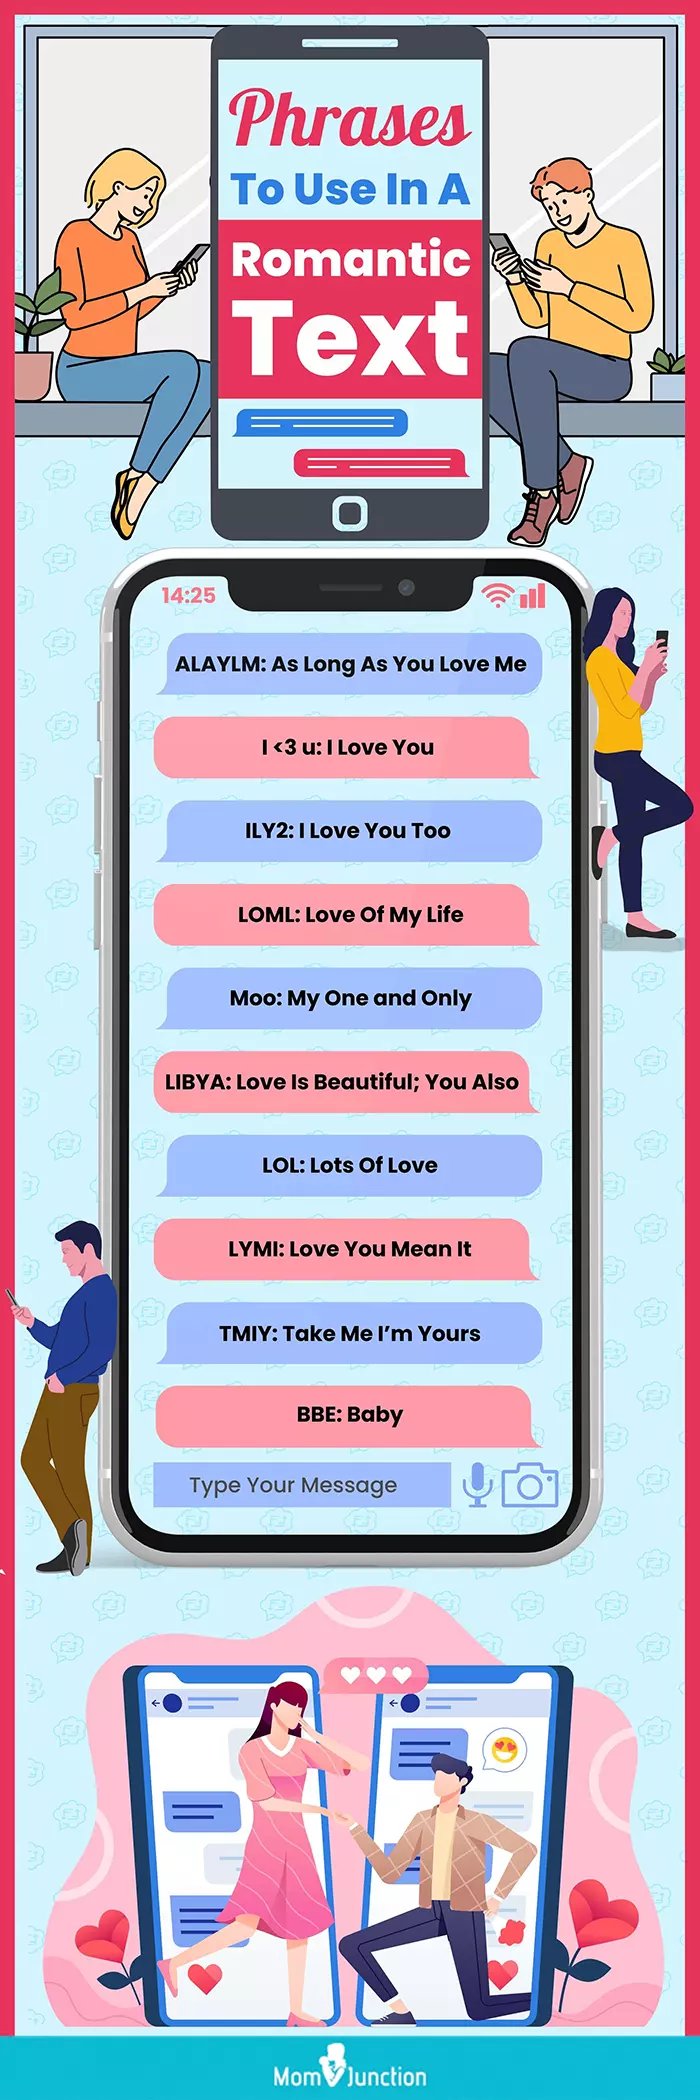 phrases to use in a romantic text (infographic)